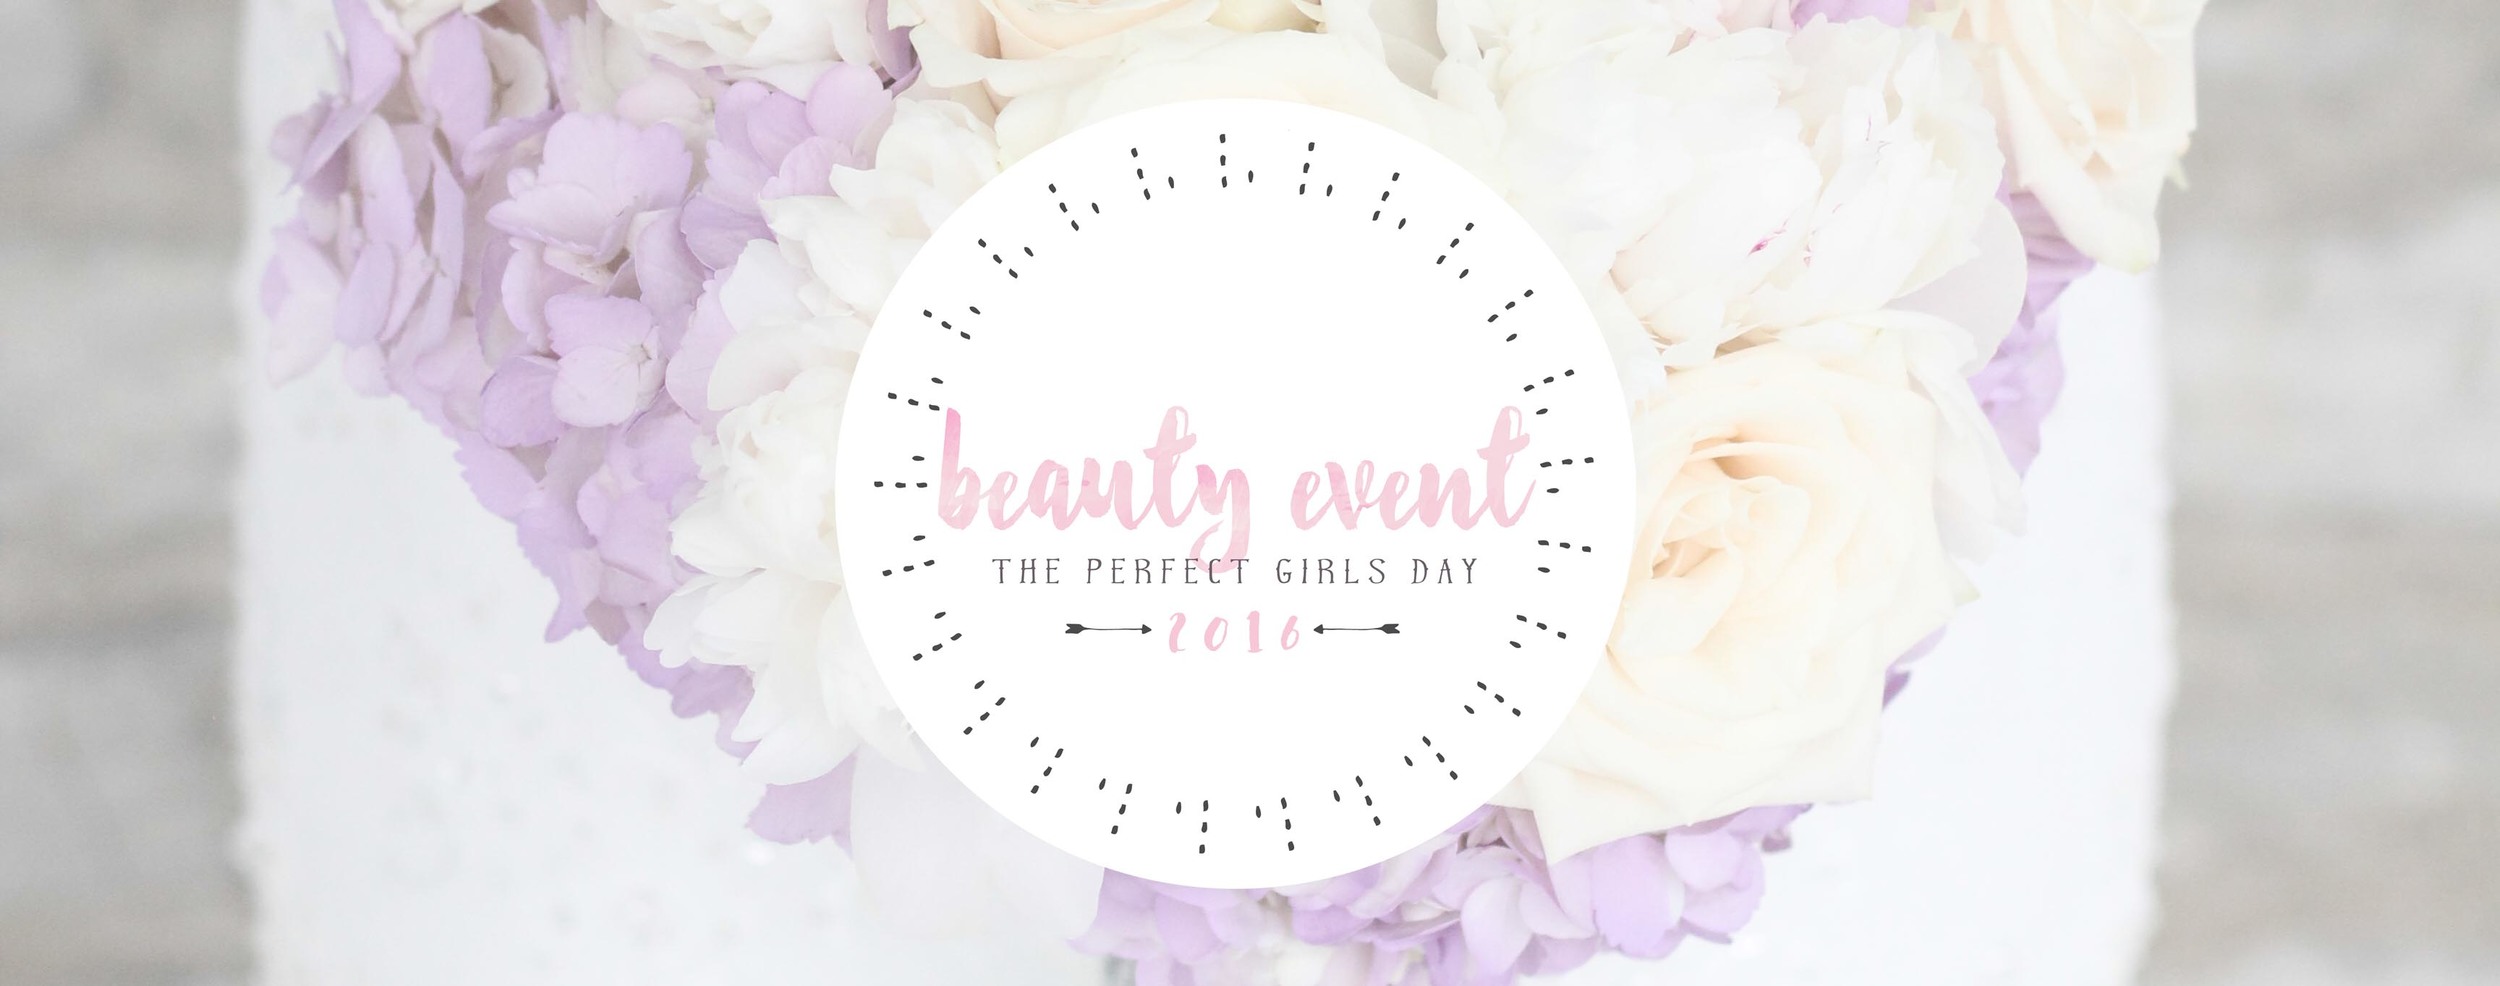   This year, I am once again teaming up with a group of AMAZING local vendors to bring you our Spring Beauty Event, the ultimate girls day! Grab one or two of your best ladies and come on down for a day of wine, delicious sweets + snacks, and a photo session celebrating YOU. Every spot includes a gift bag, complimentary snacks + wine, professional hair and makeup done by our amazing team, and an hour long photo session! Slots are extremely limited, so sign up today!!